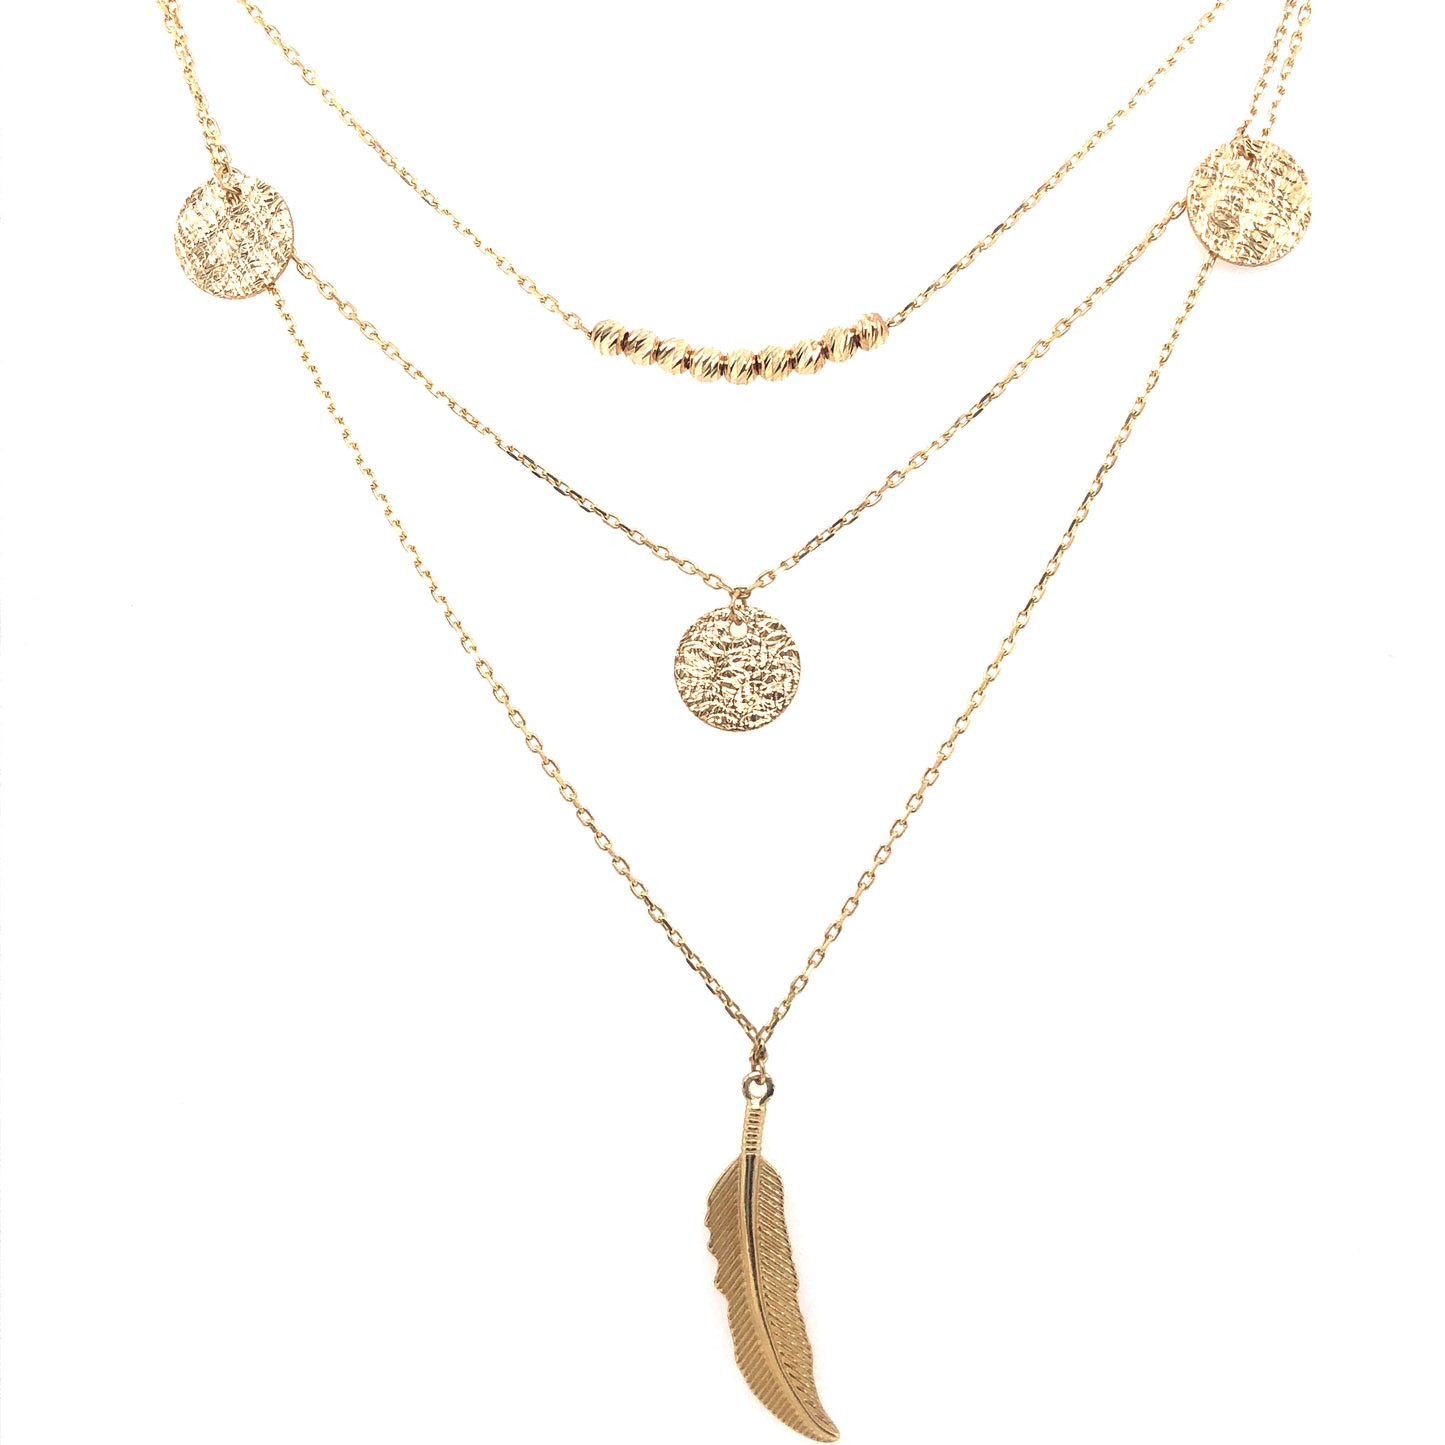 Triple Layer Feather Chain Necklace 14k Gold | Luby Gold Collection | Luby 